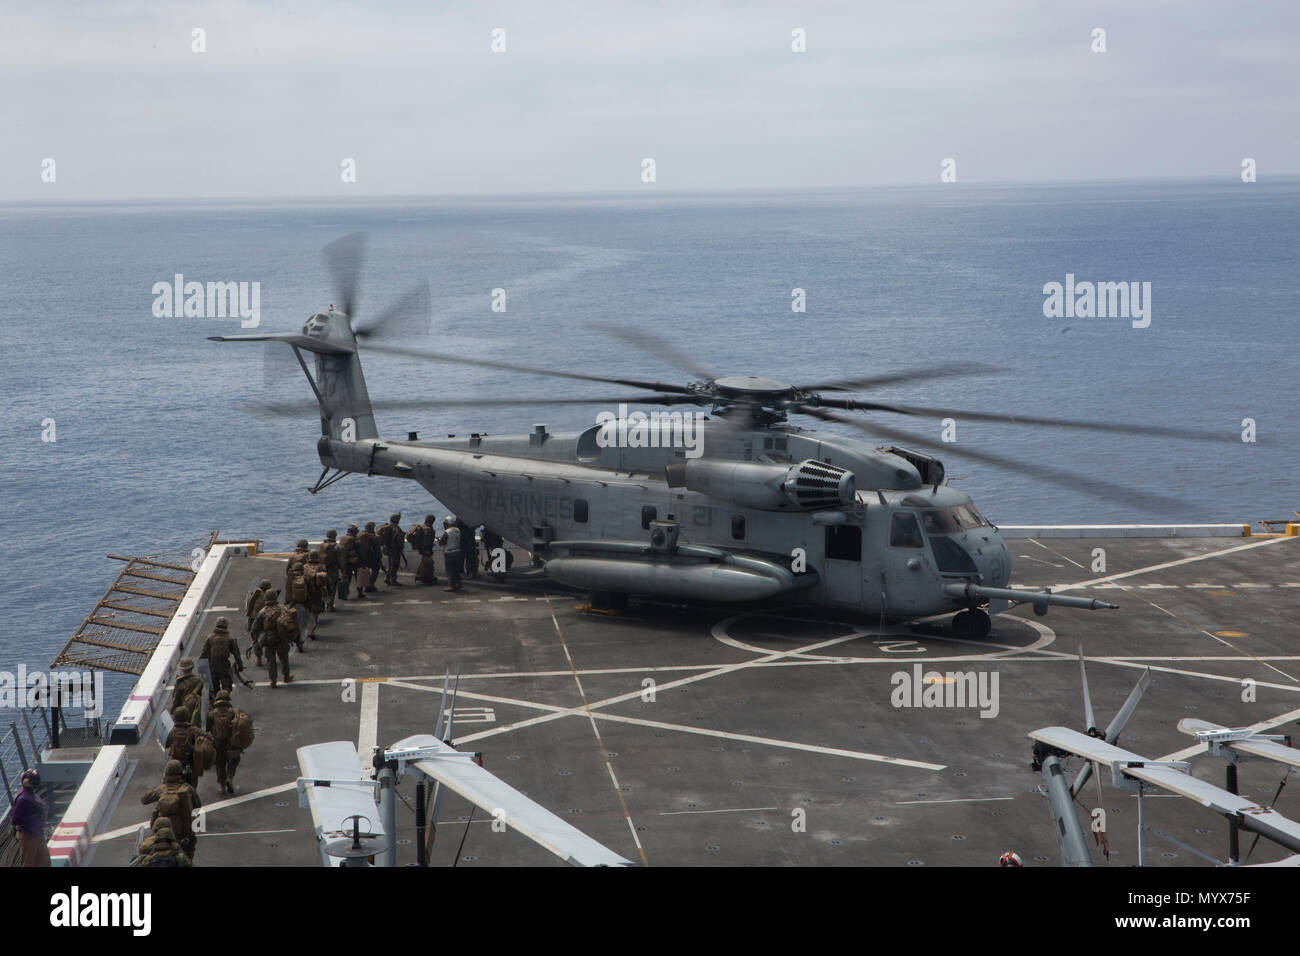 U.S. Marines with Combat Logistics Battalion 13, 13th Marine Expeditionary Unit (MEU), board a CH-53E Super Stallion with Marine Medium Tiltrotor Squadron 166 (Reinforced), 13th MEU, at sea aboard the San Antonio-class amphibious transport dock USS Anchorage (LPD 23), June 3, 2018. The Essex Amphibious Ready Group (ARG) and 13th MEU are conducting Composite Training Unit Exercise (COMPTUEX), the final exercise before the units’ upcoming deployment. This exercise validates the ARG/MEU team’s ability to adapt and execute missions in ever-changing, unknown environments. Upon completion of COMPTUE Stock Photo